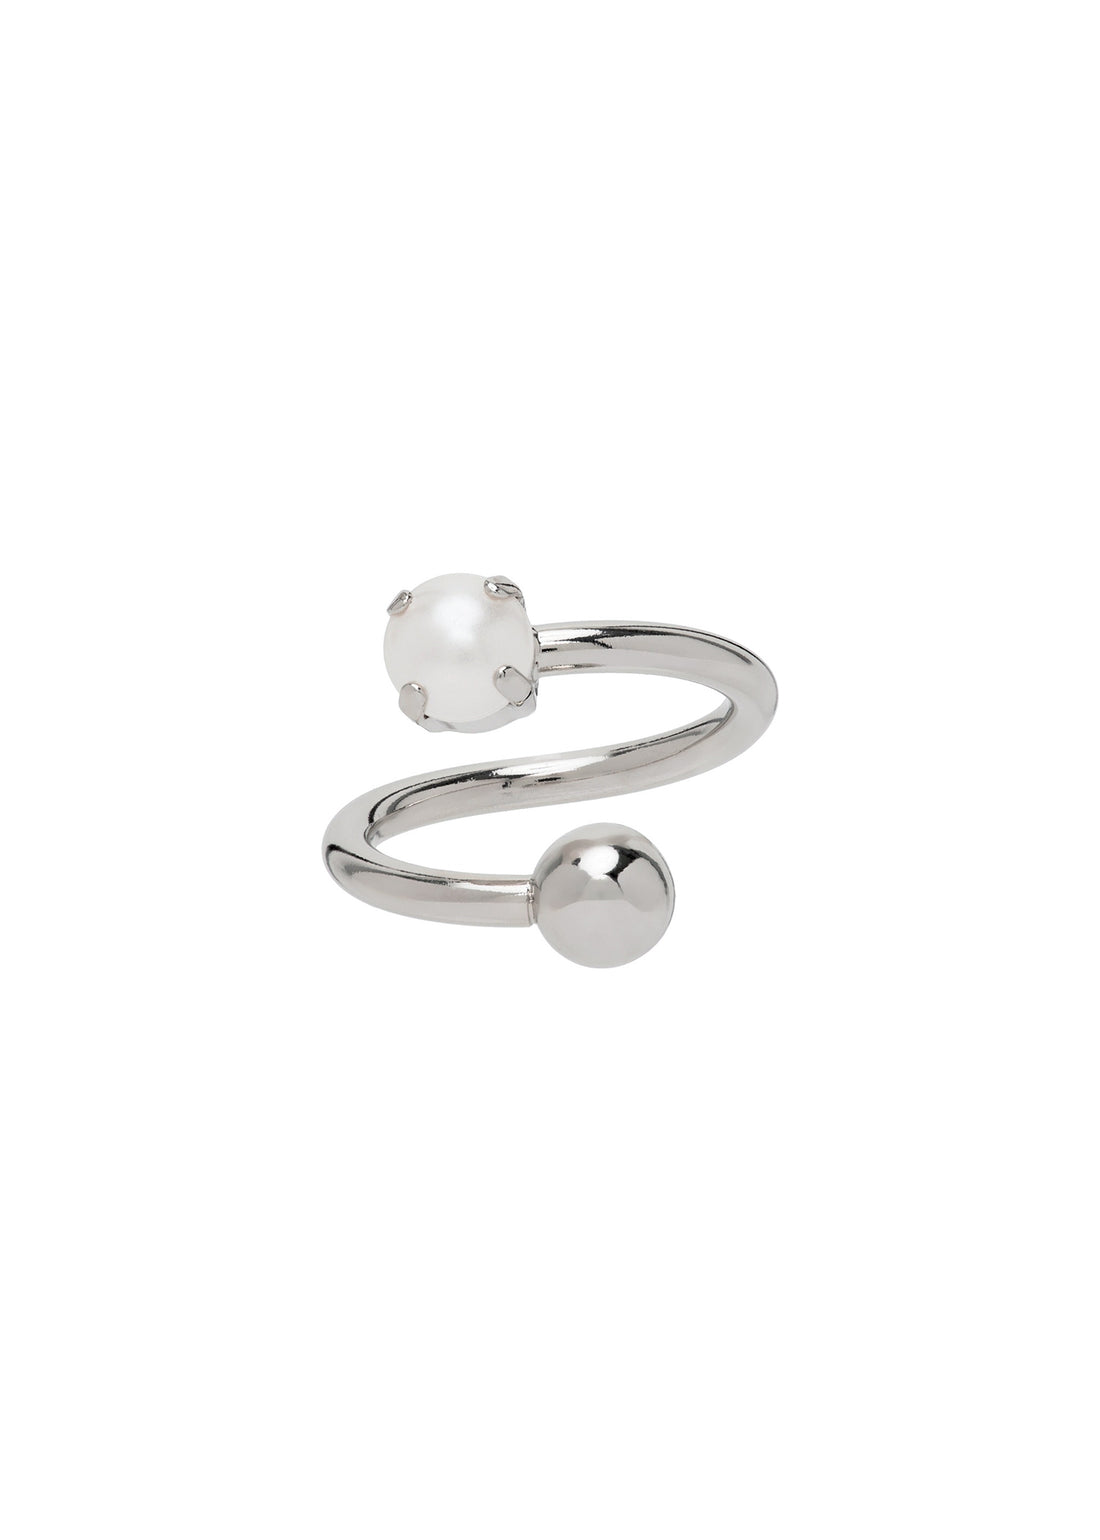 Justine Clenquet COCO Ring – Y2HOUSE